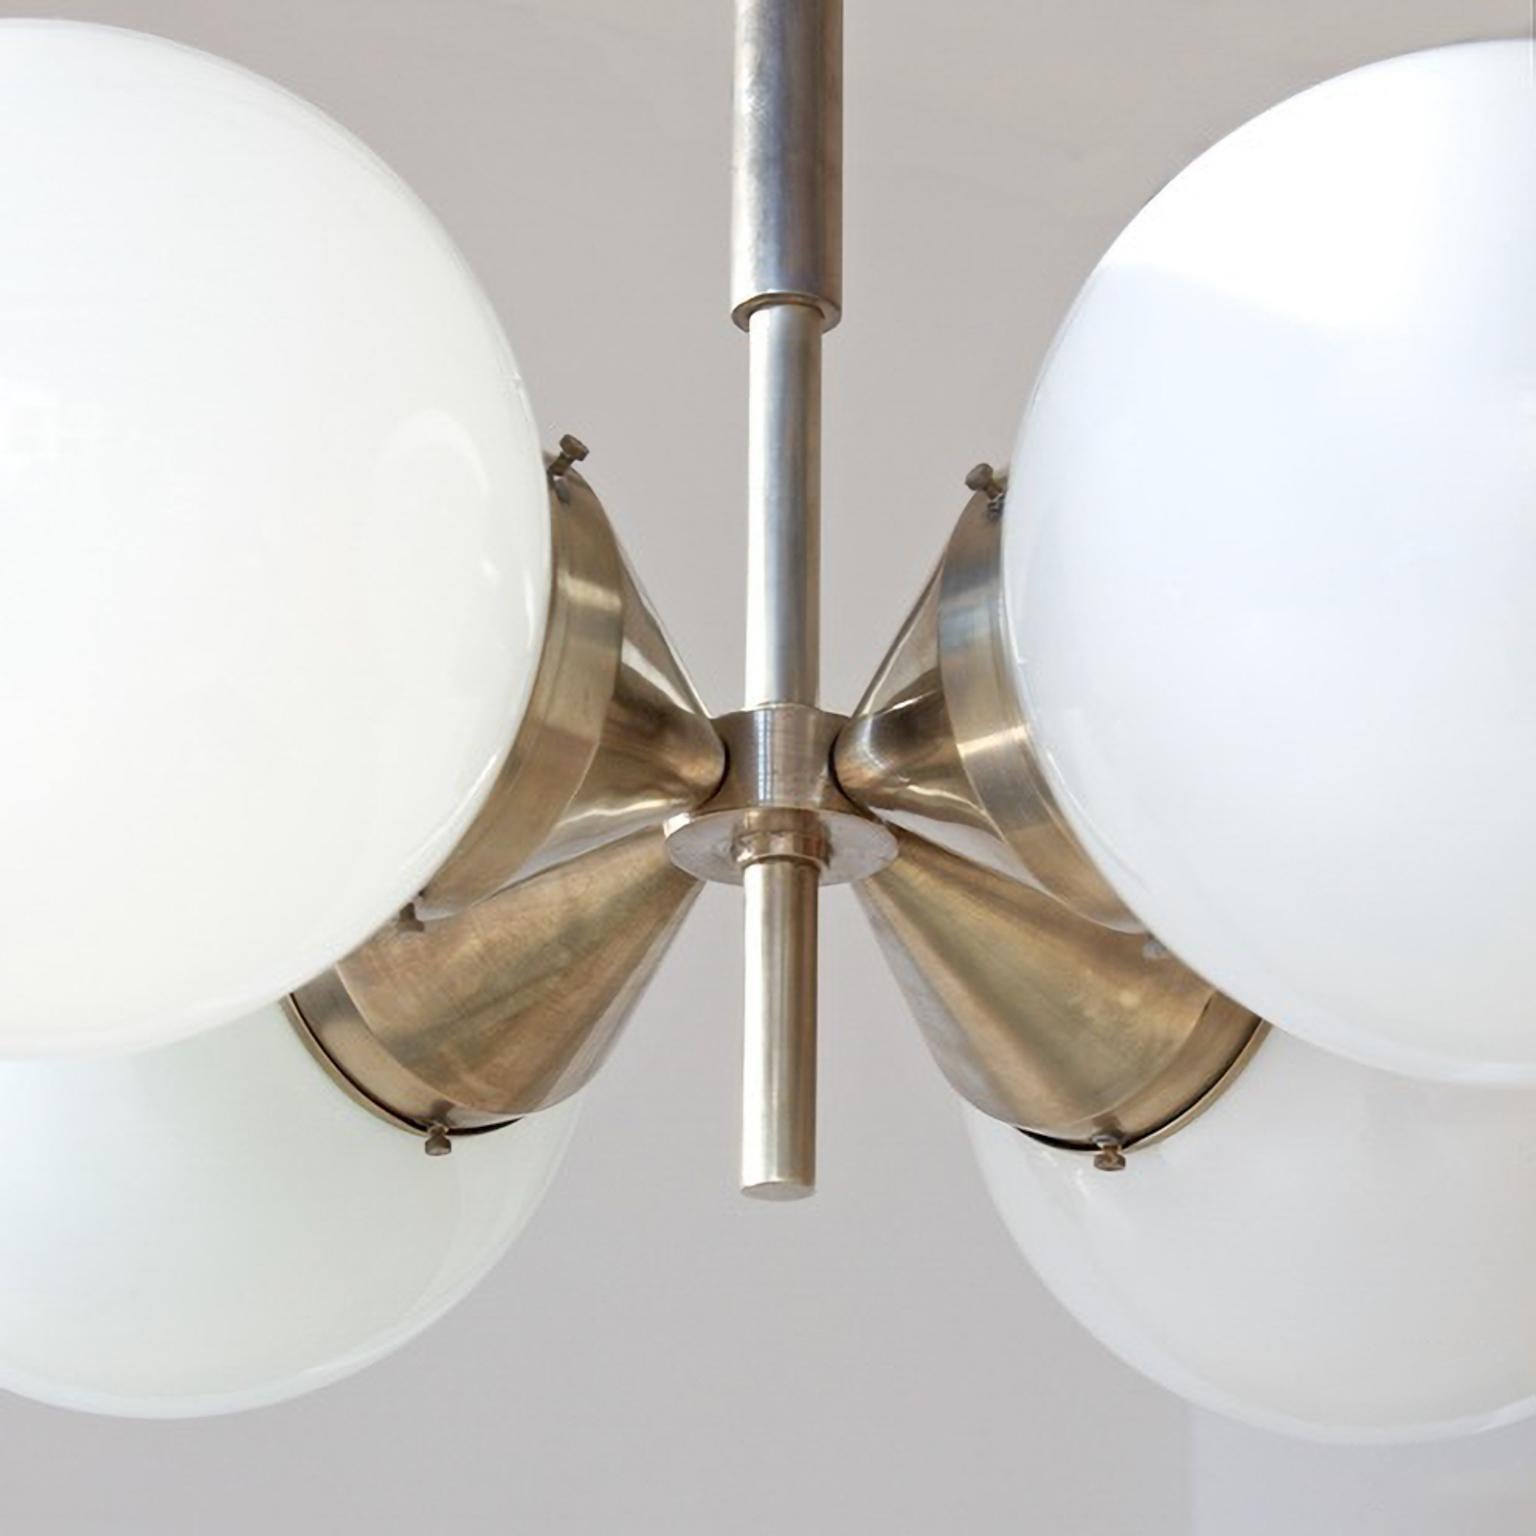 Modernist Pendant Light with 4 Opaline Glass Bulbs, Nickel Plated Brass c. 1930 For Sale 3